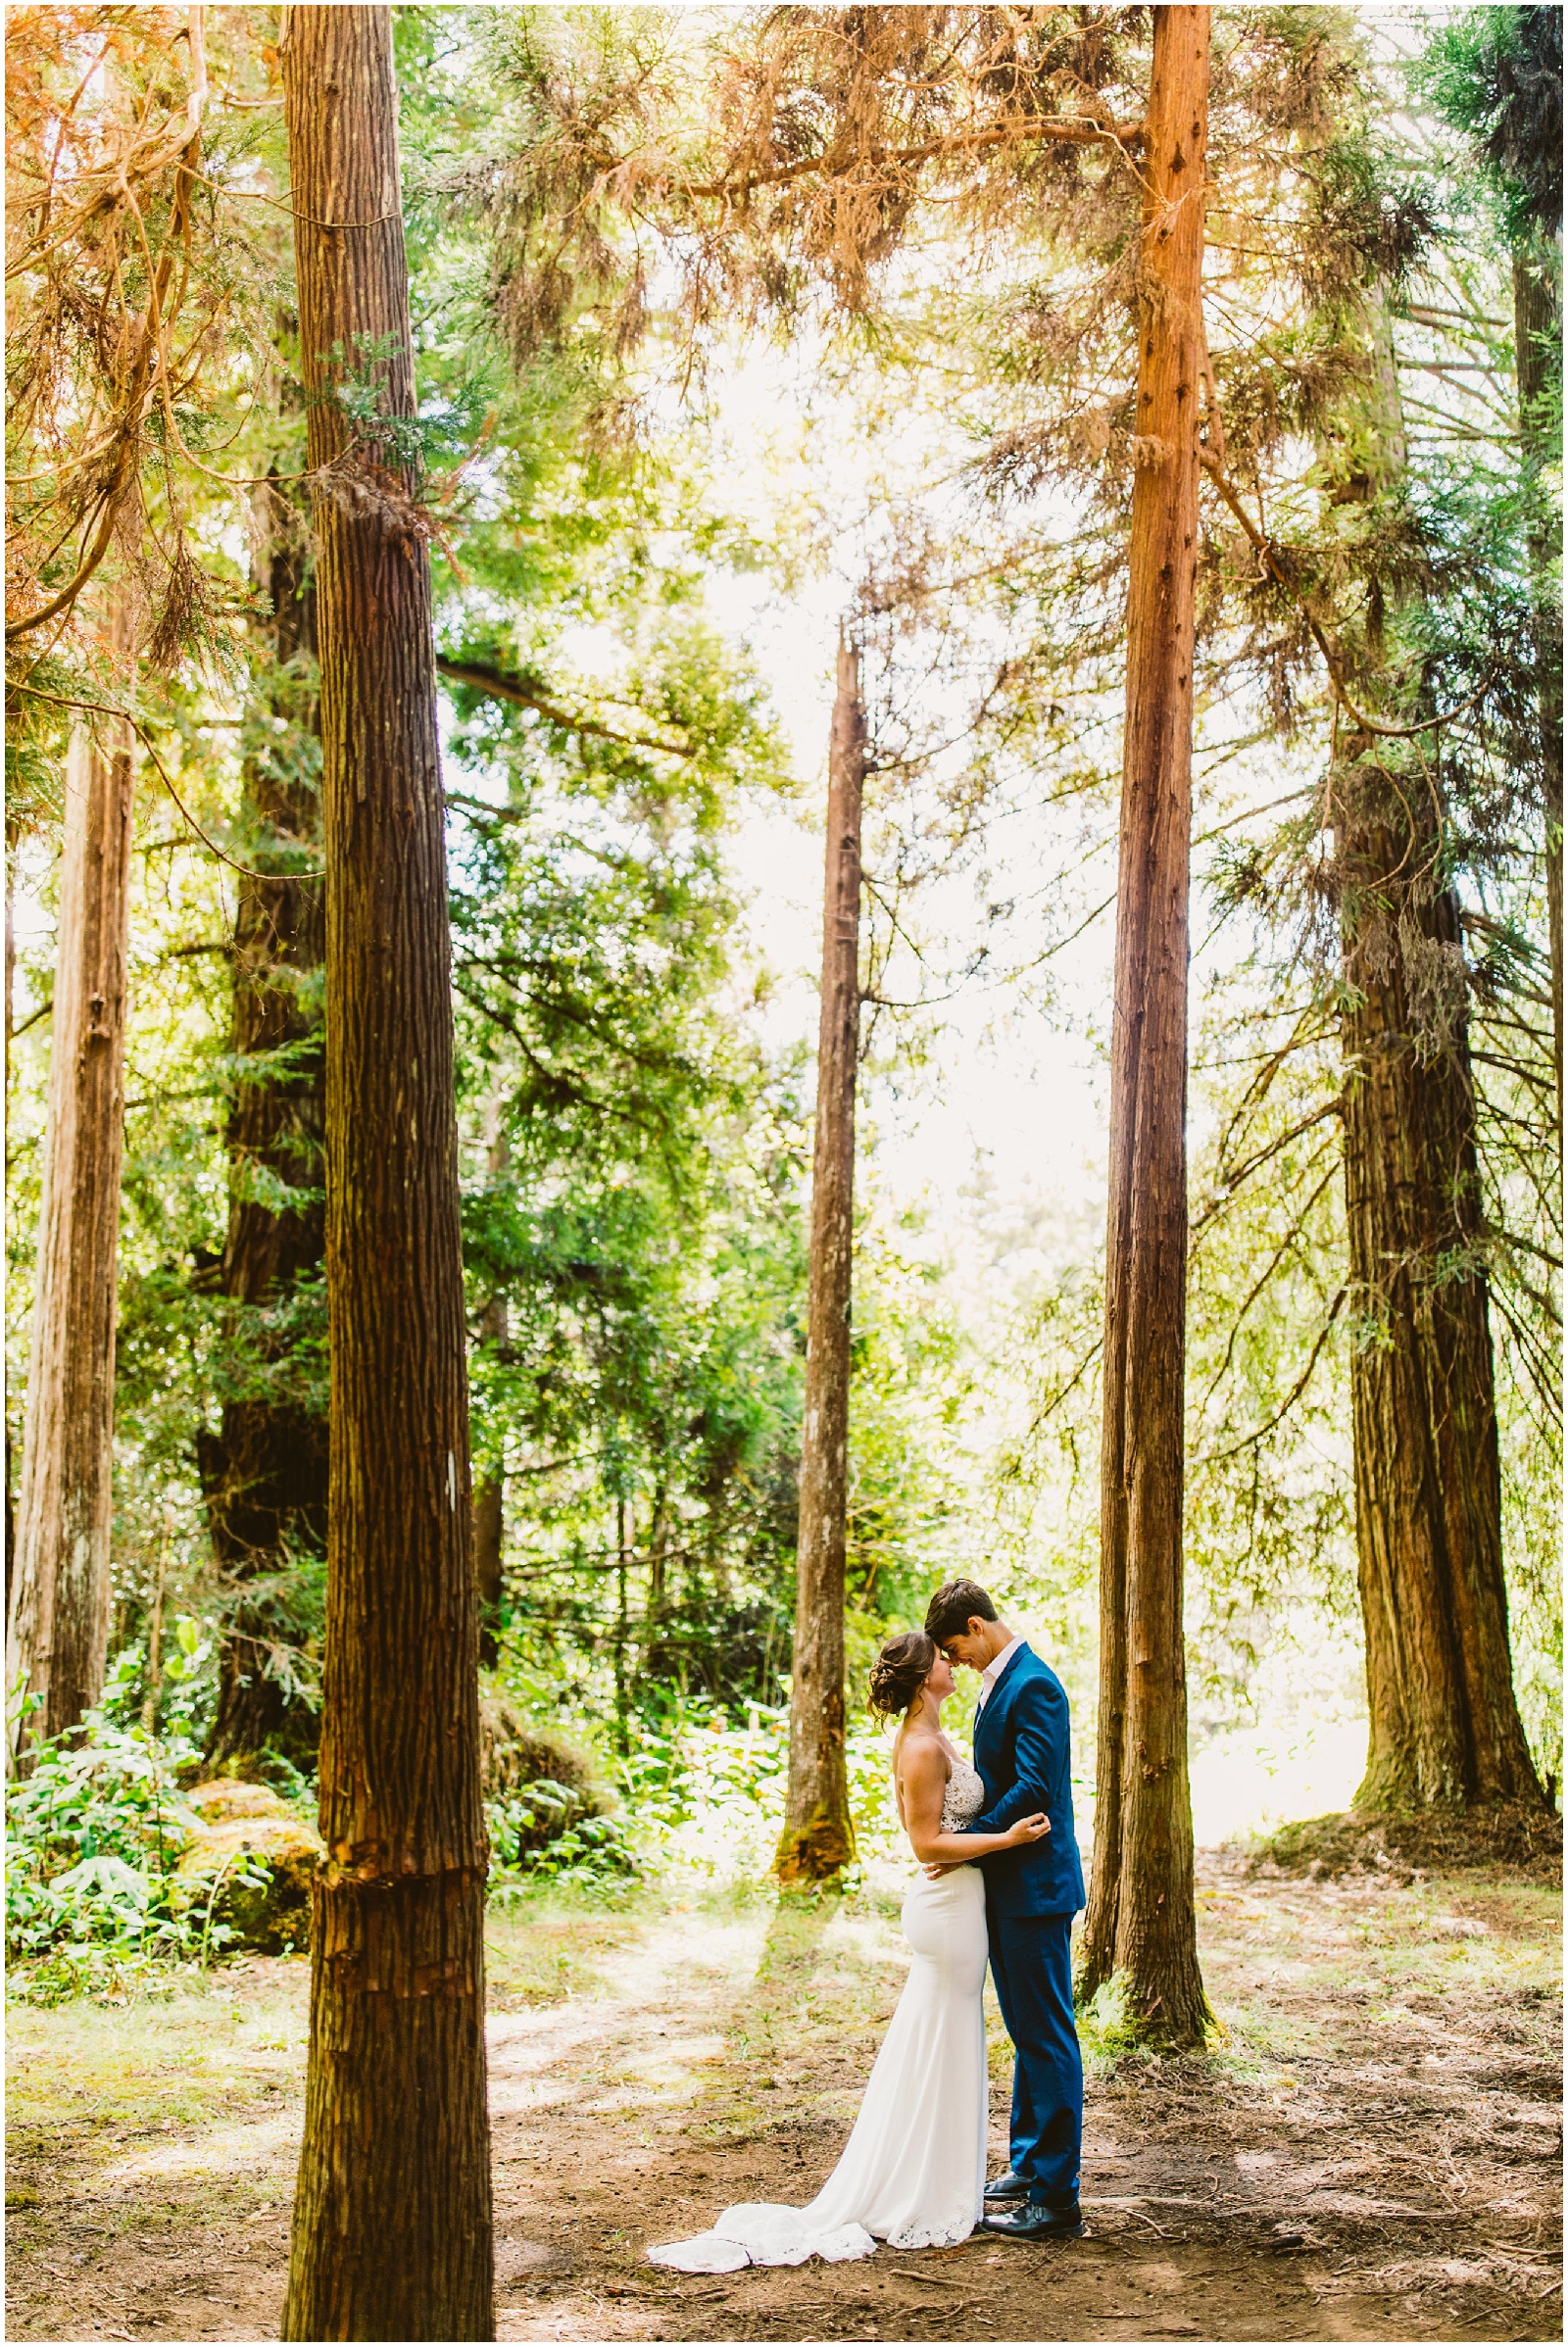 Kauai elopement bride and groom in the forest photo by meg bradyhouse